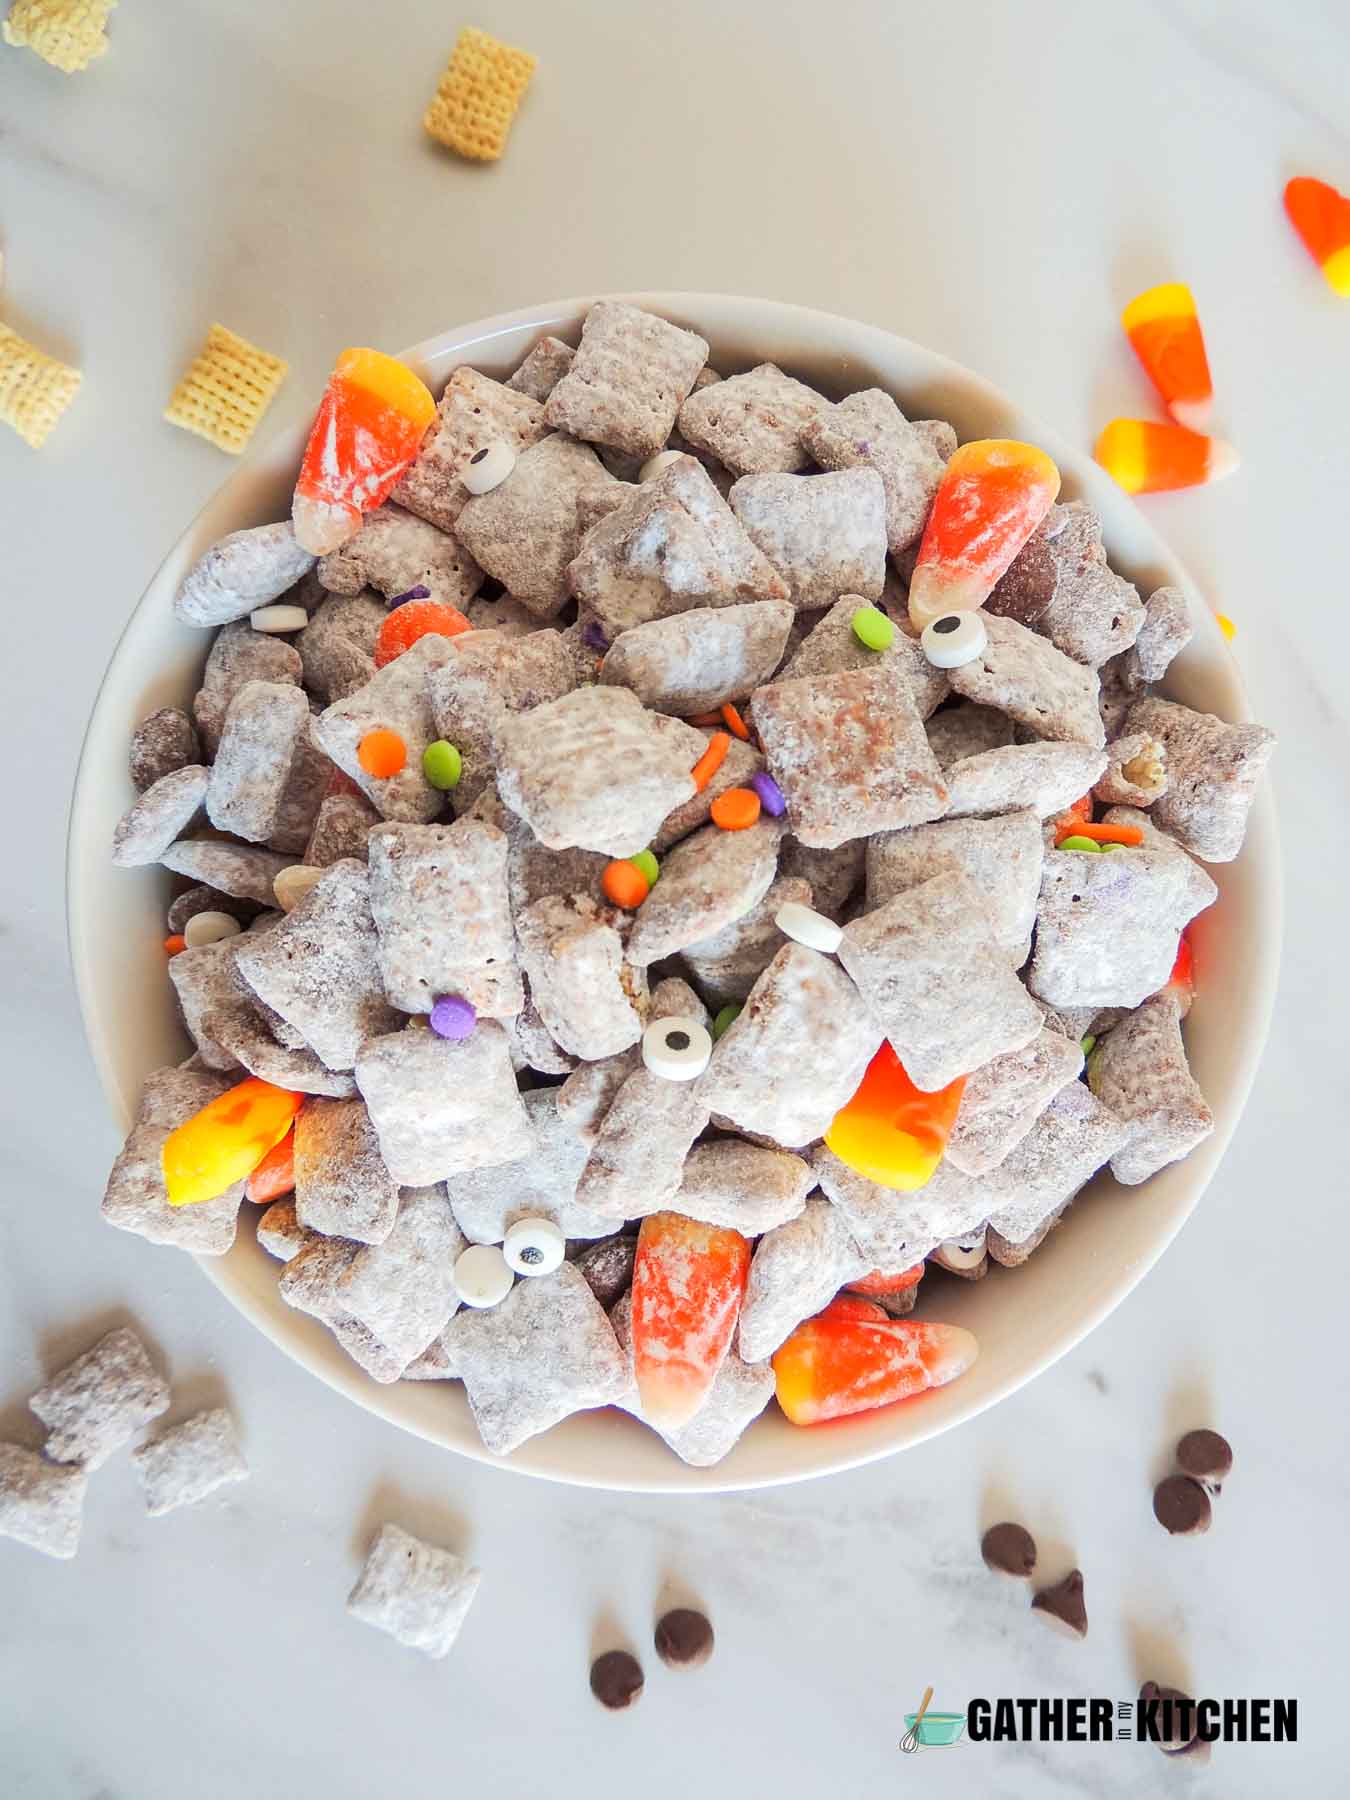 Top down view of Halloween Muddy buddies in a bowl.